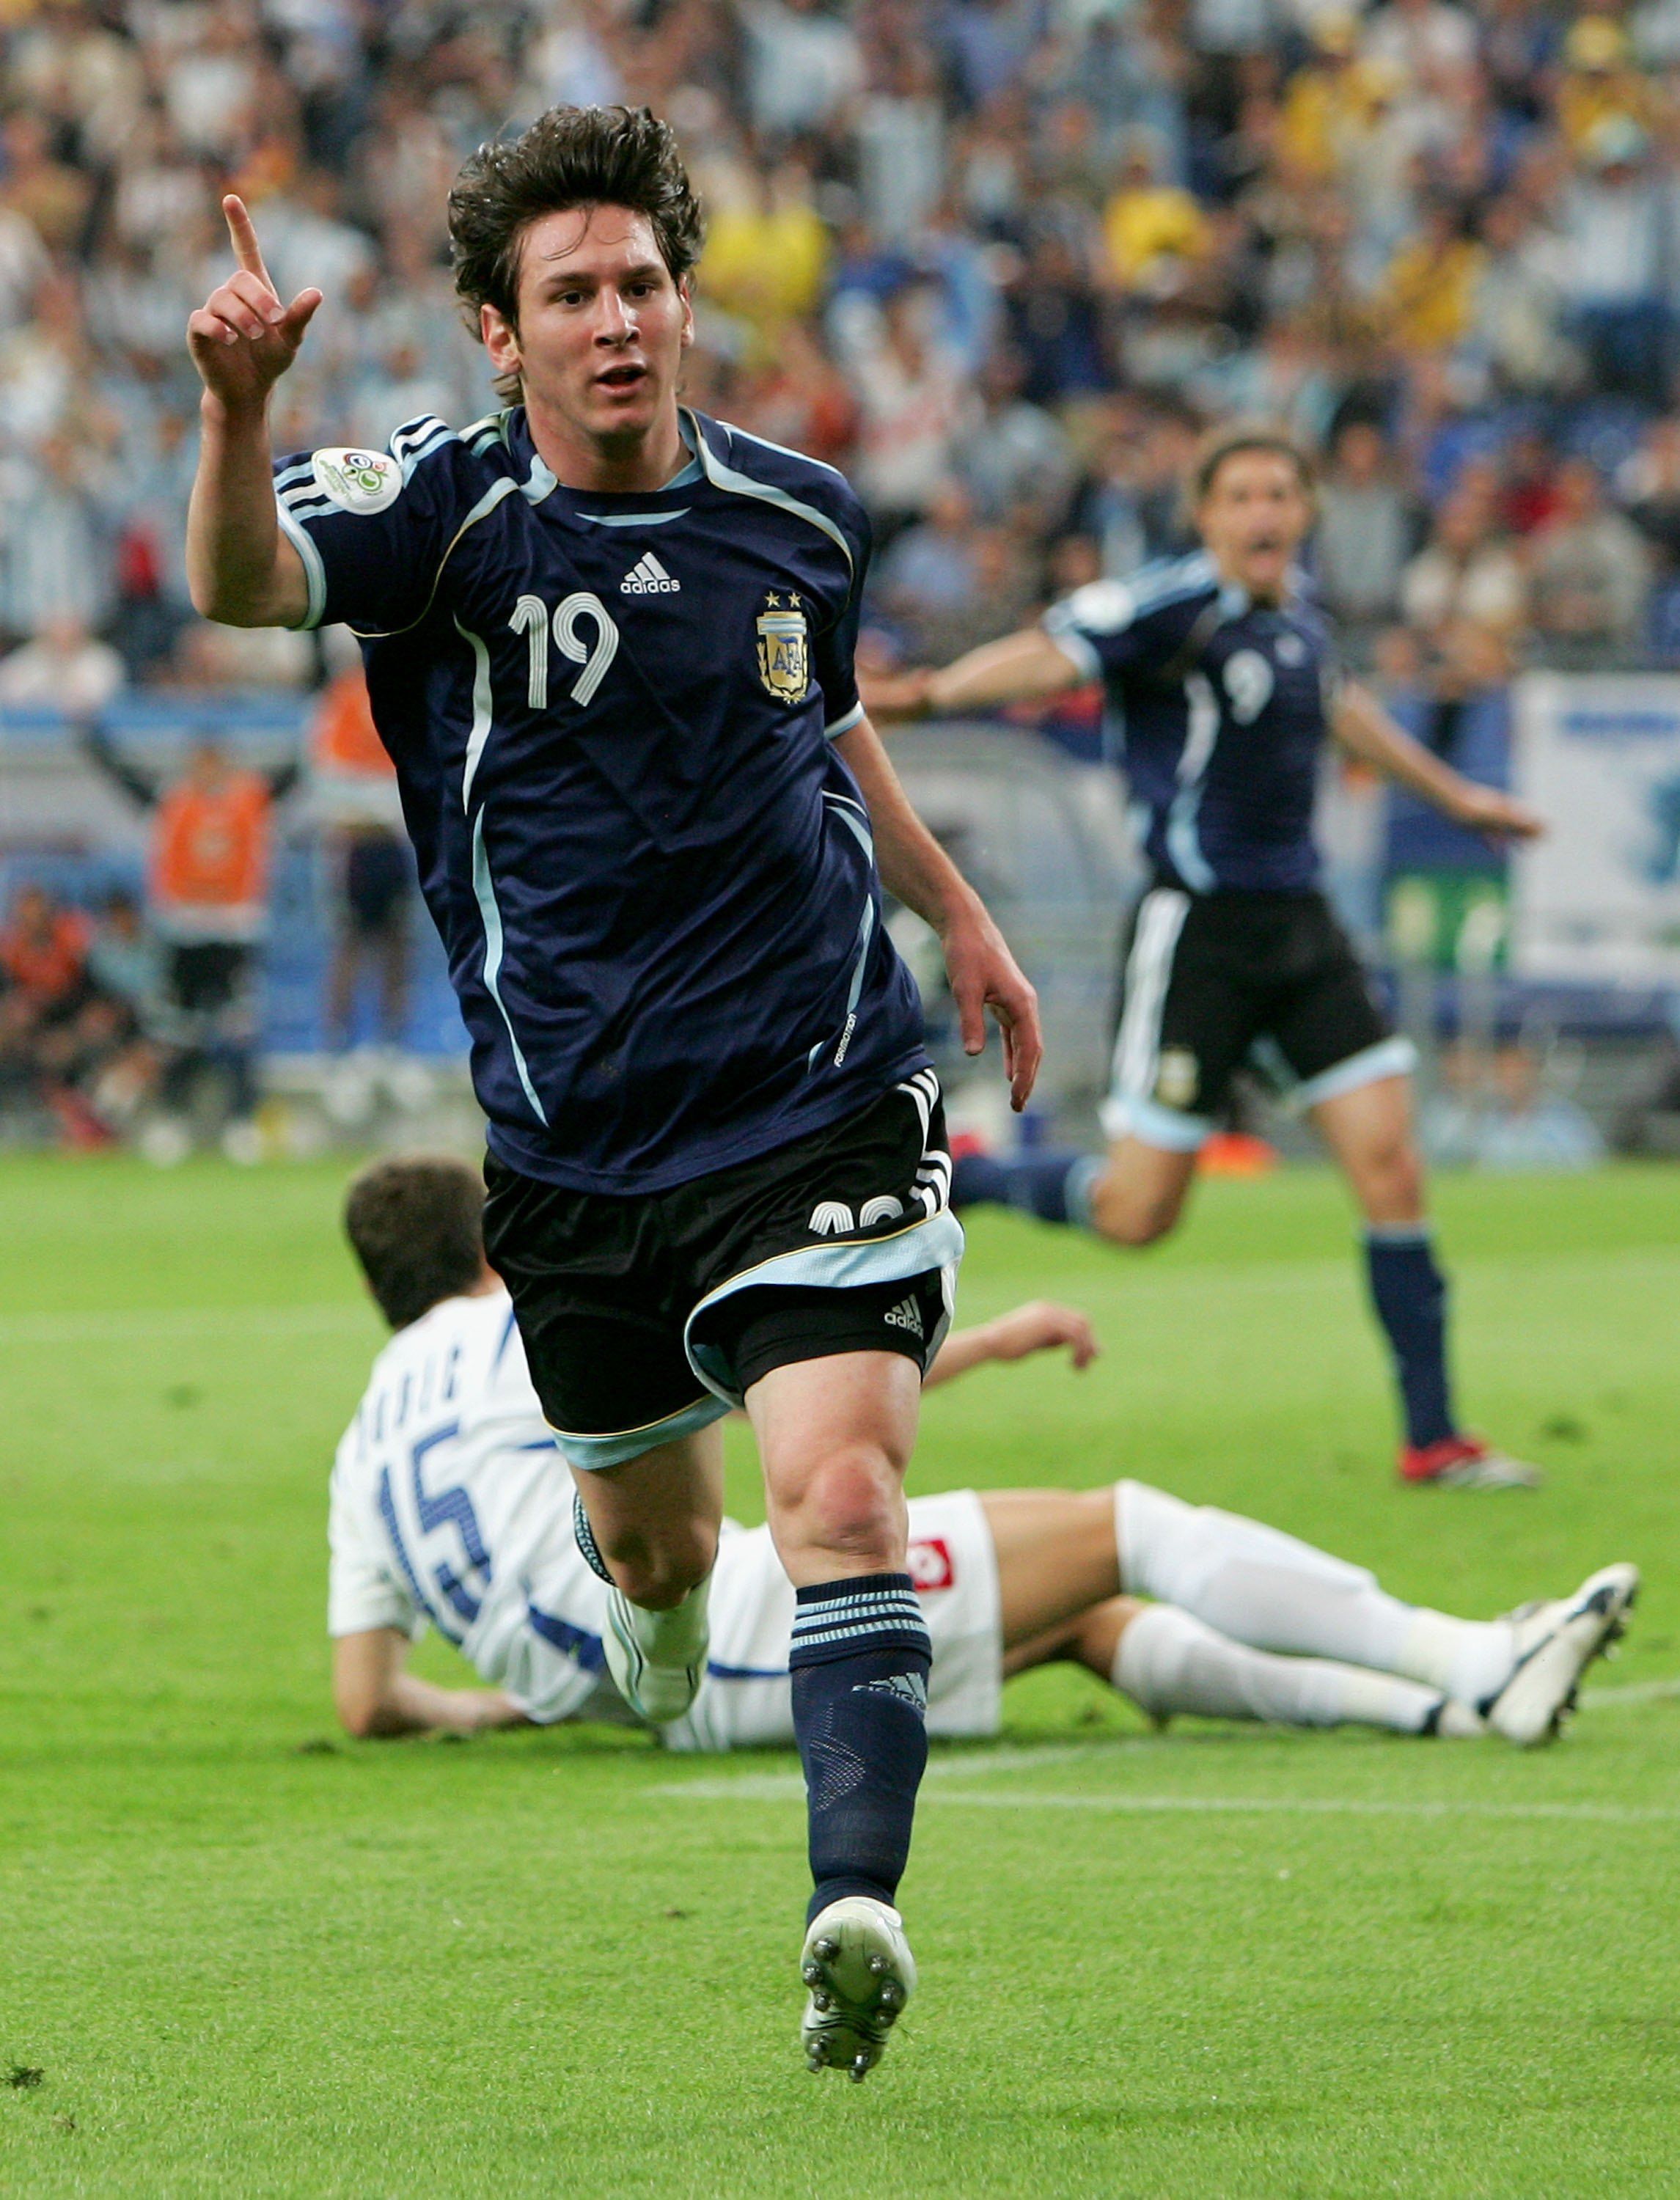 Lionel Messi scored on his World Cup debut vs Serbia